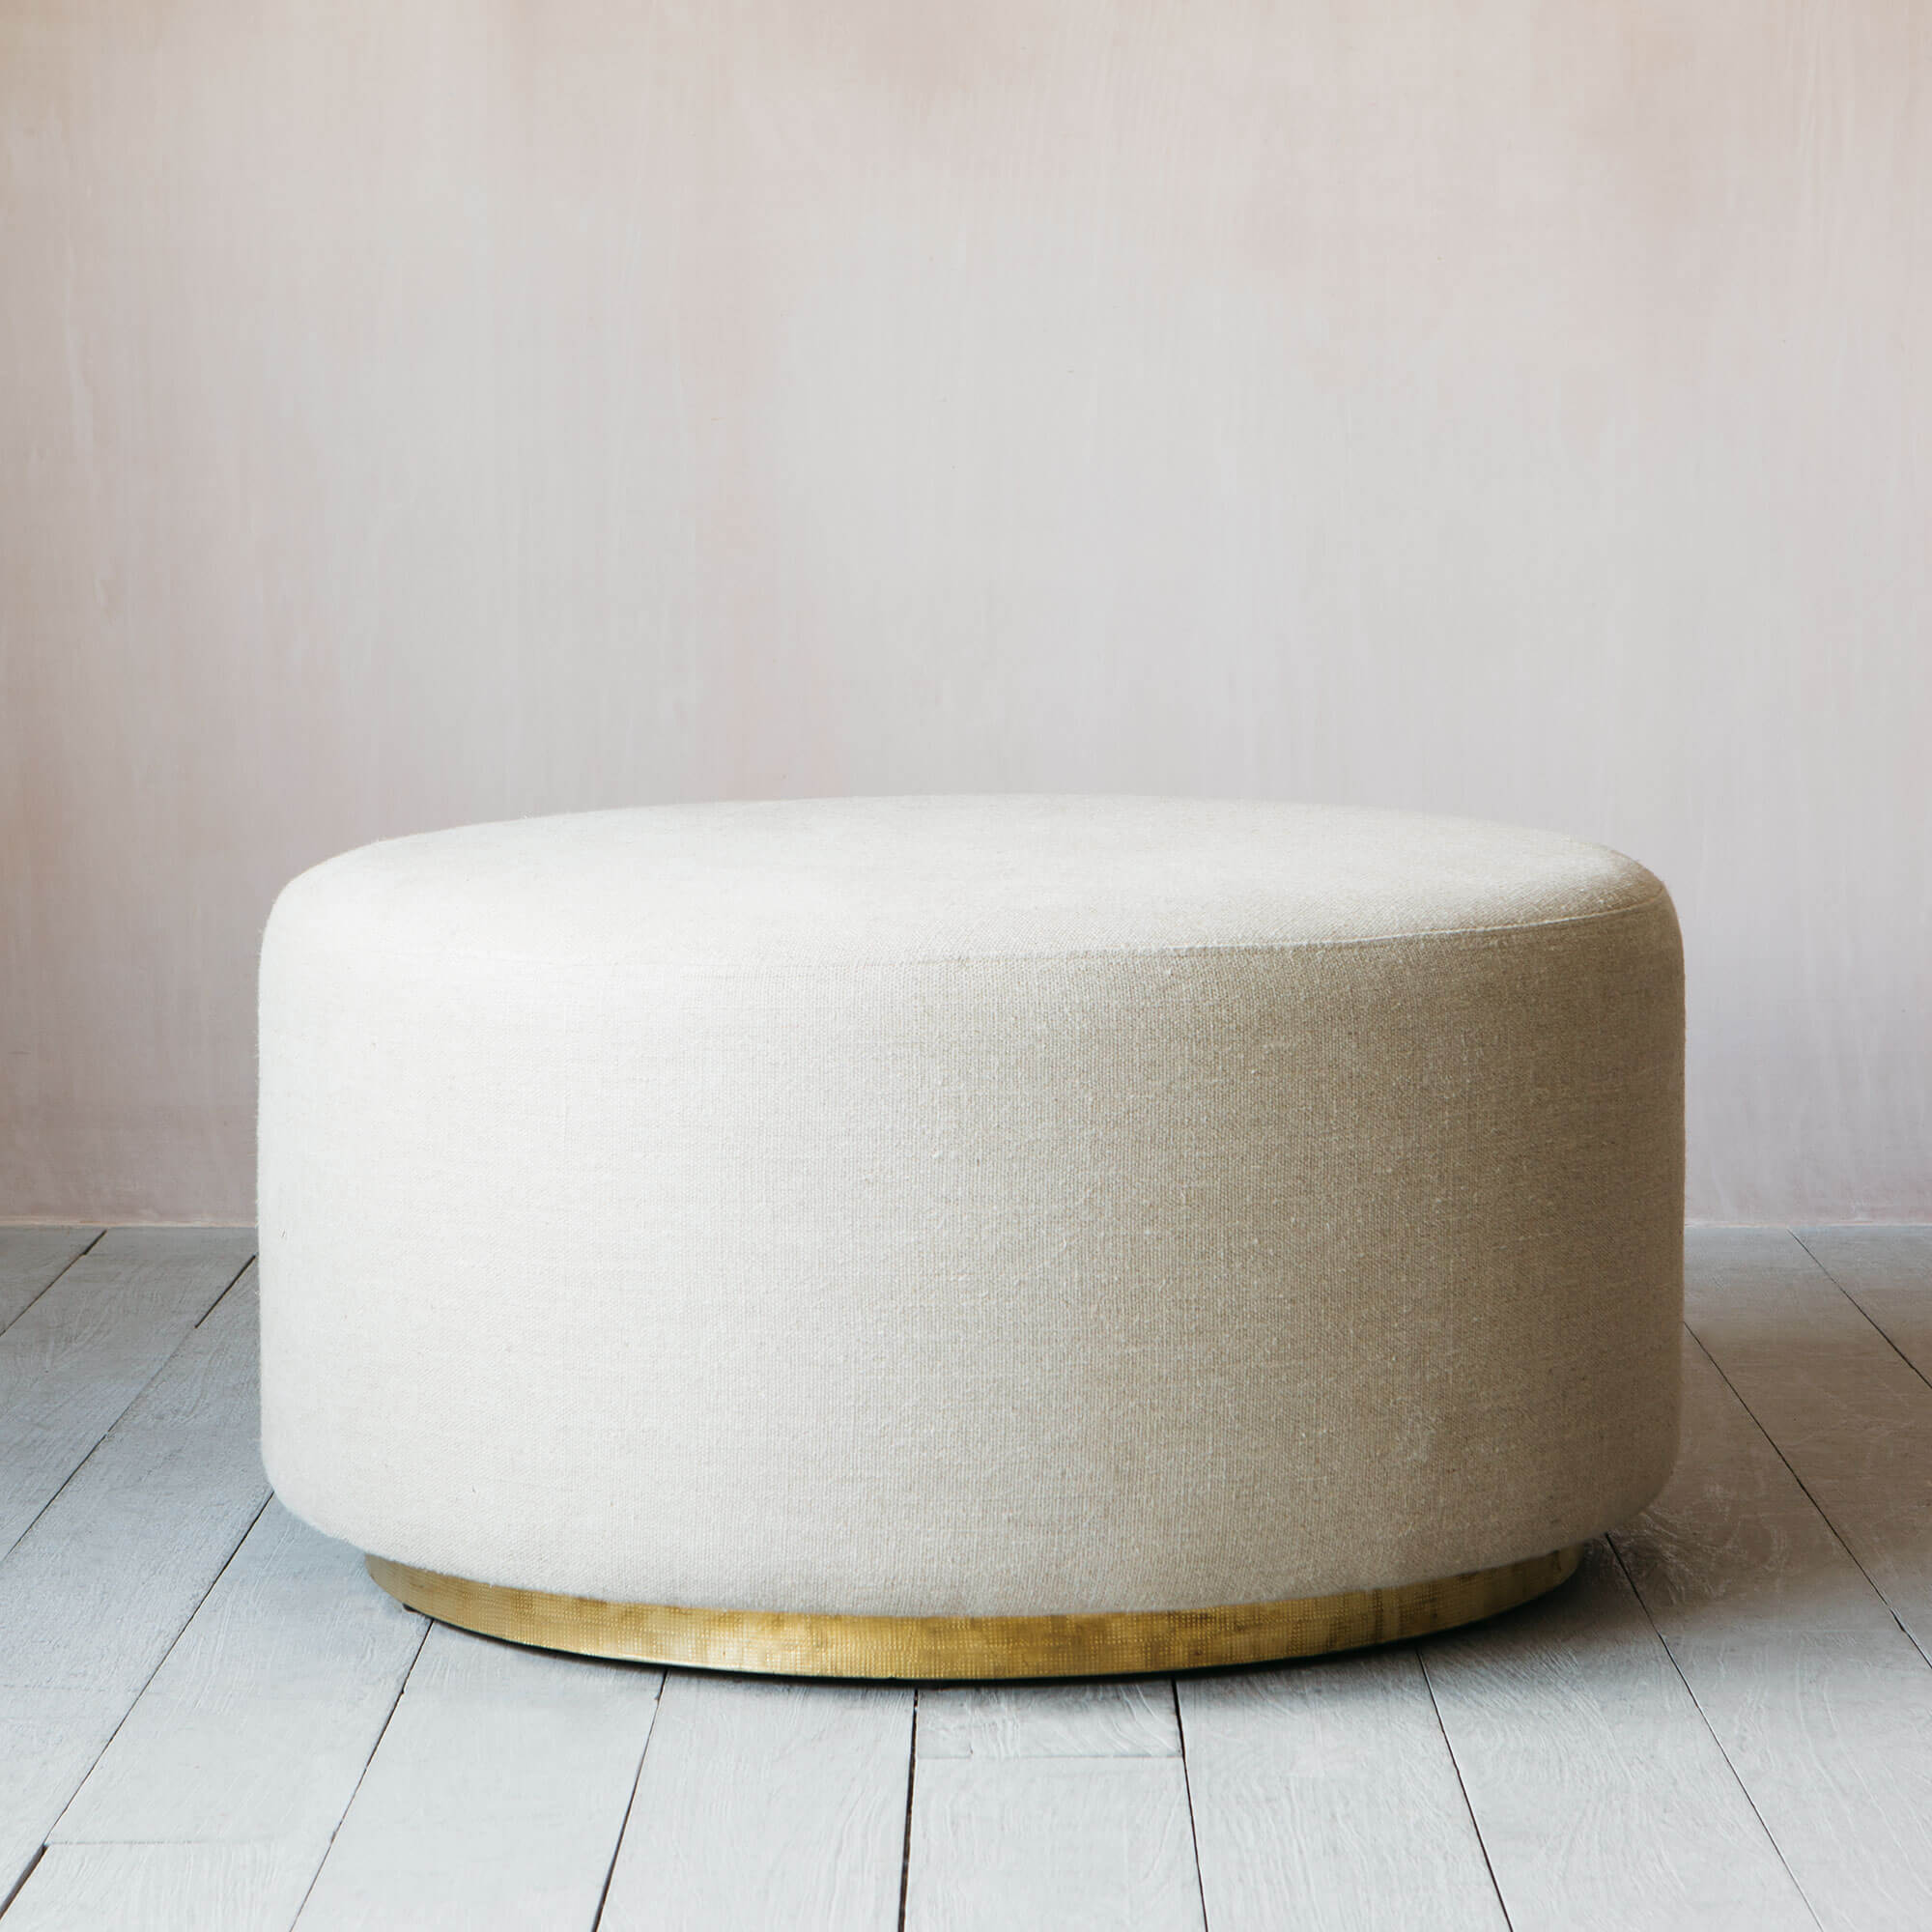 Read more about Graham and green sofia large linen ottoman